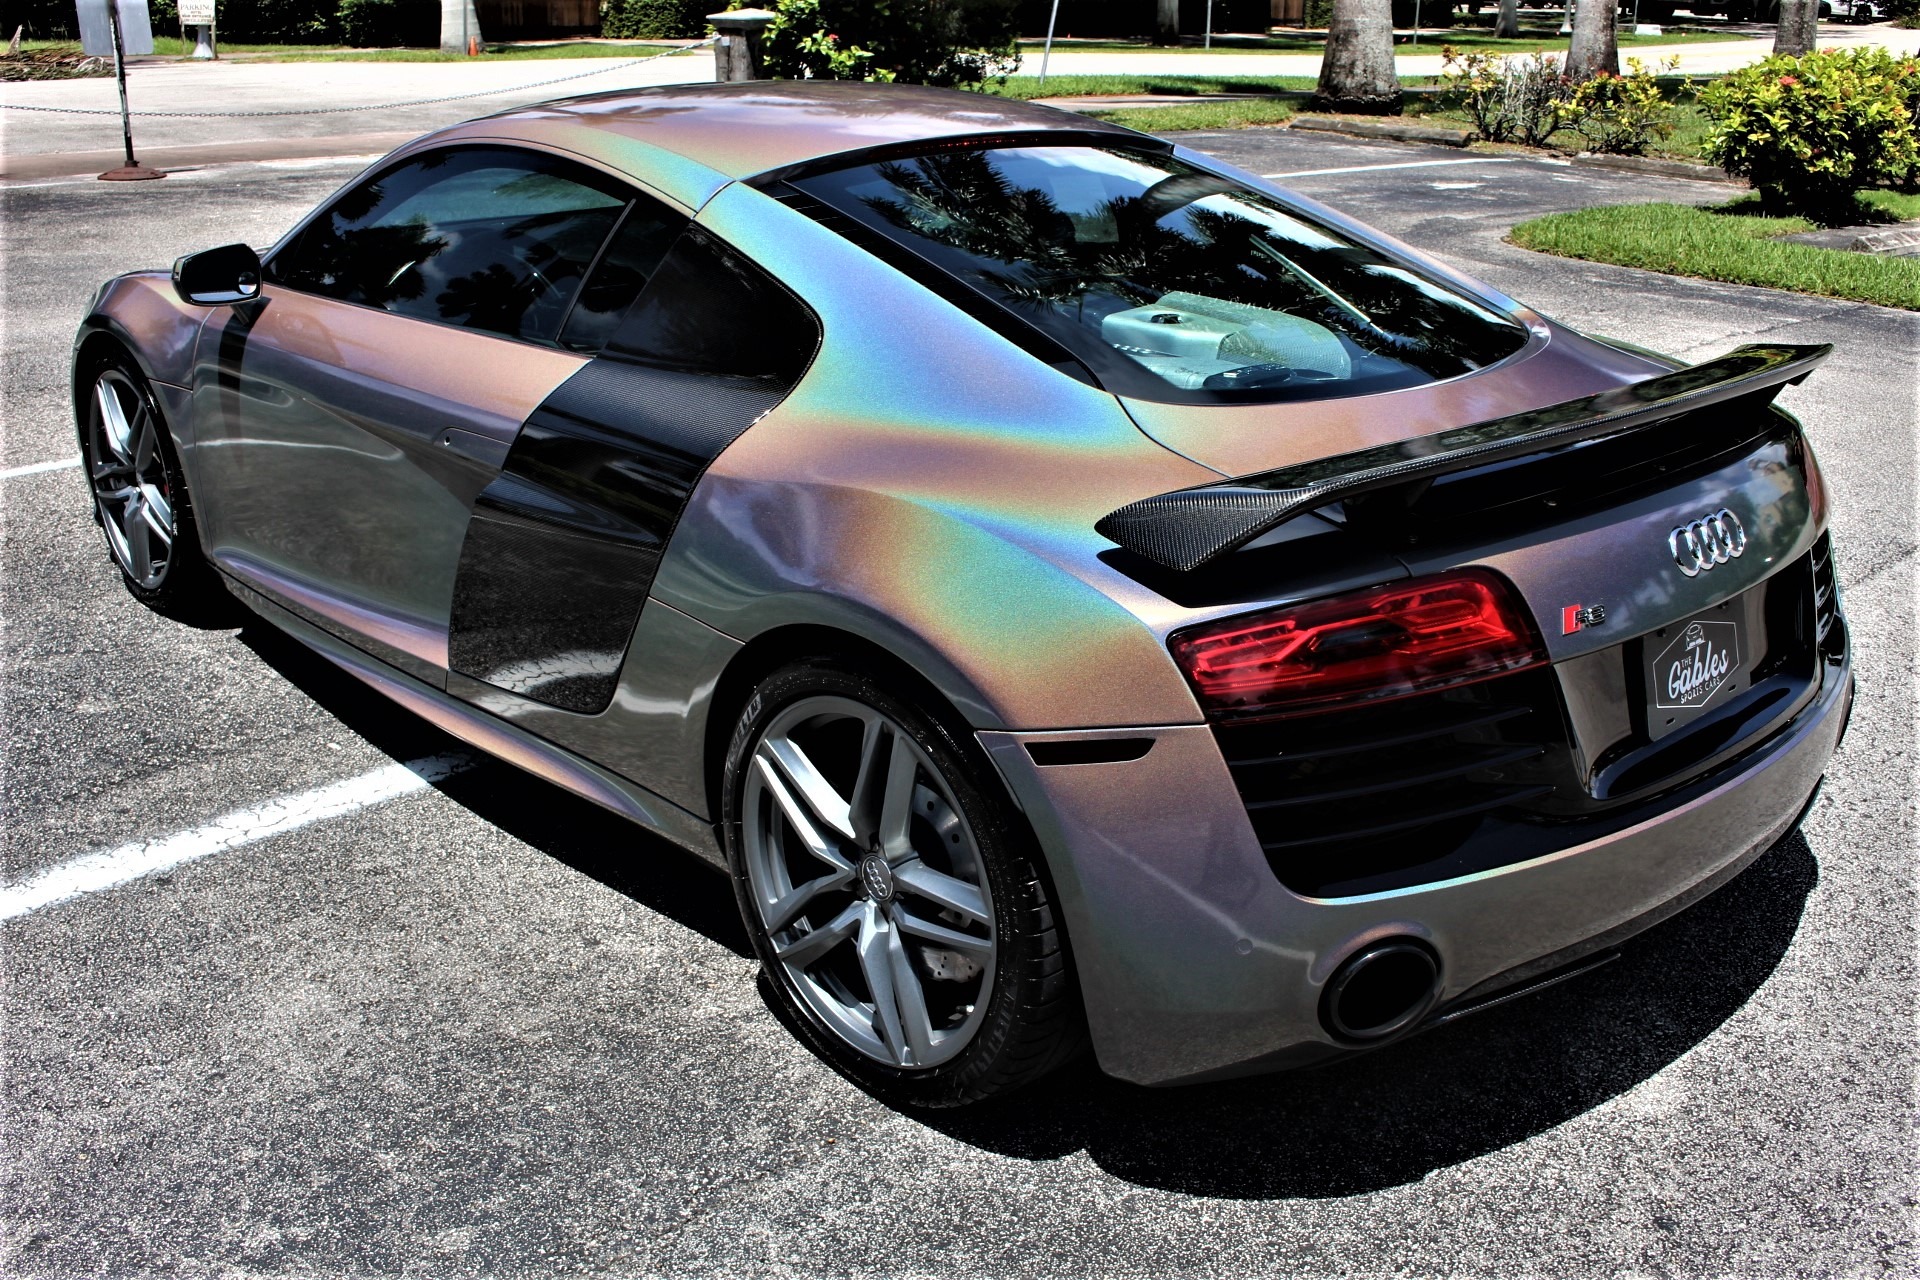 Used 2014 Audi R8 5.2 quattro for sale Sold at The Gables Sports Cars in Miami FL 33146 3